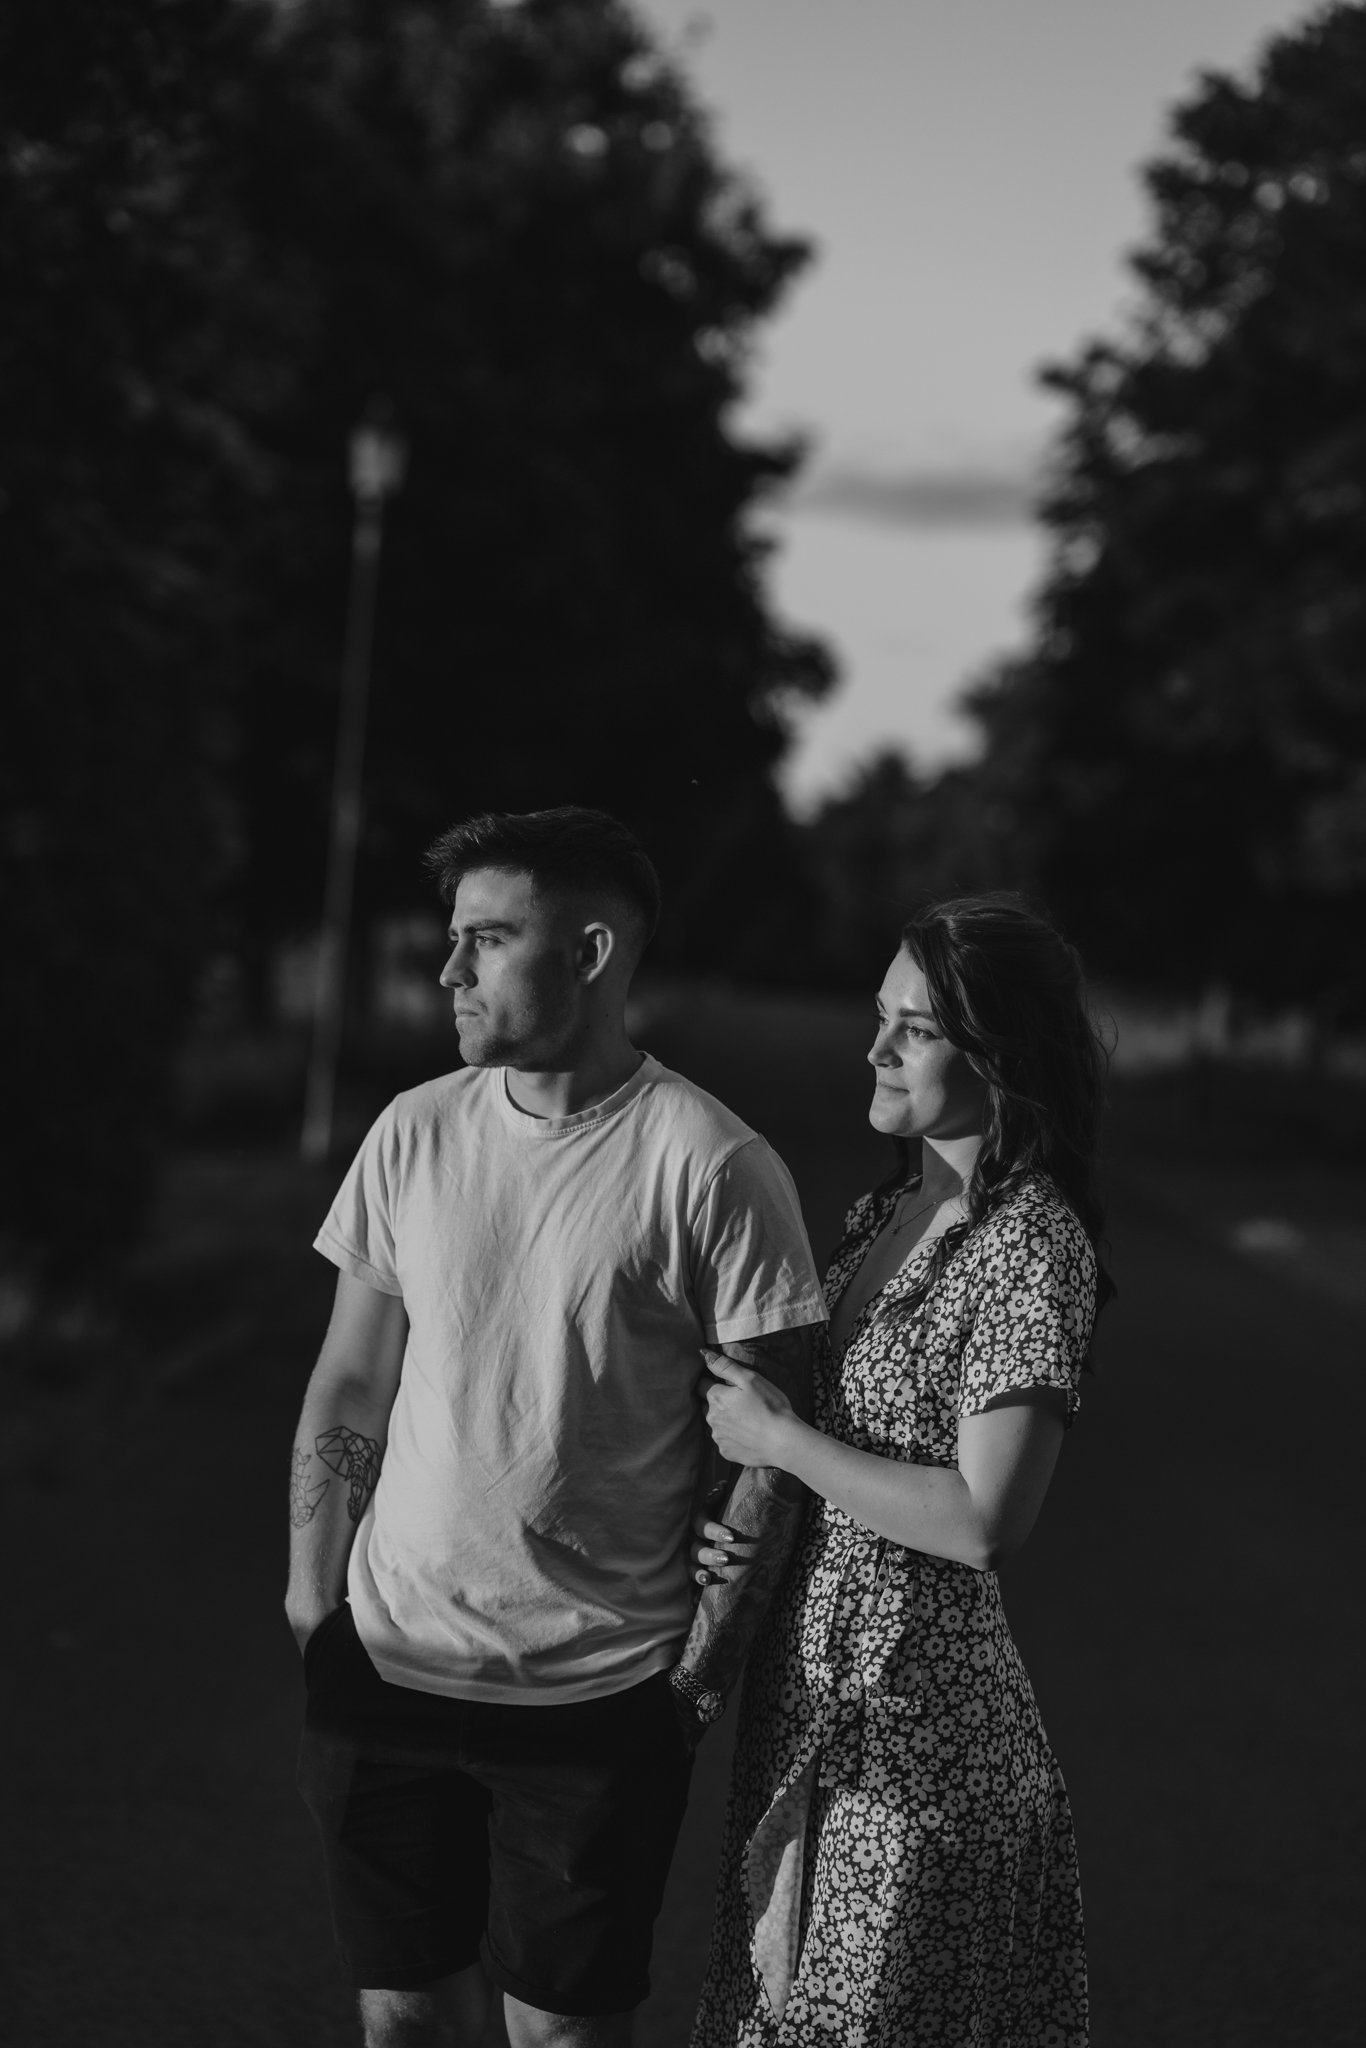 Angus Scotland Engagement and Wedding Photographer - Emily and Gabriel - Adventure Couple Session97.jpg